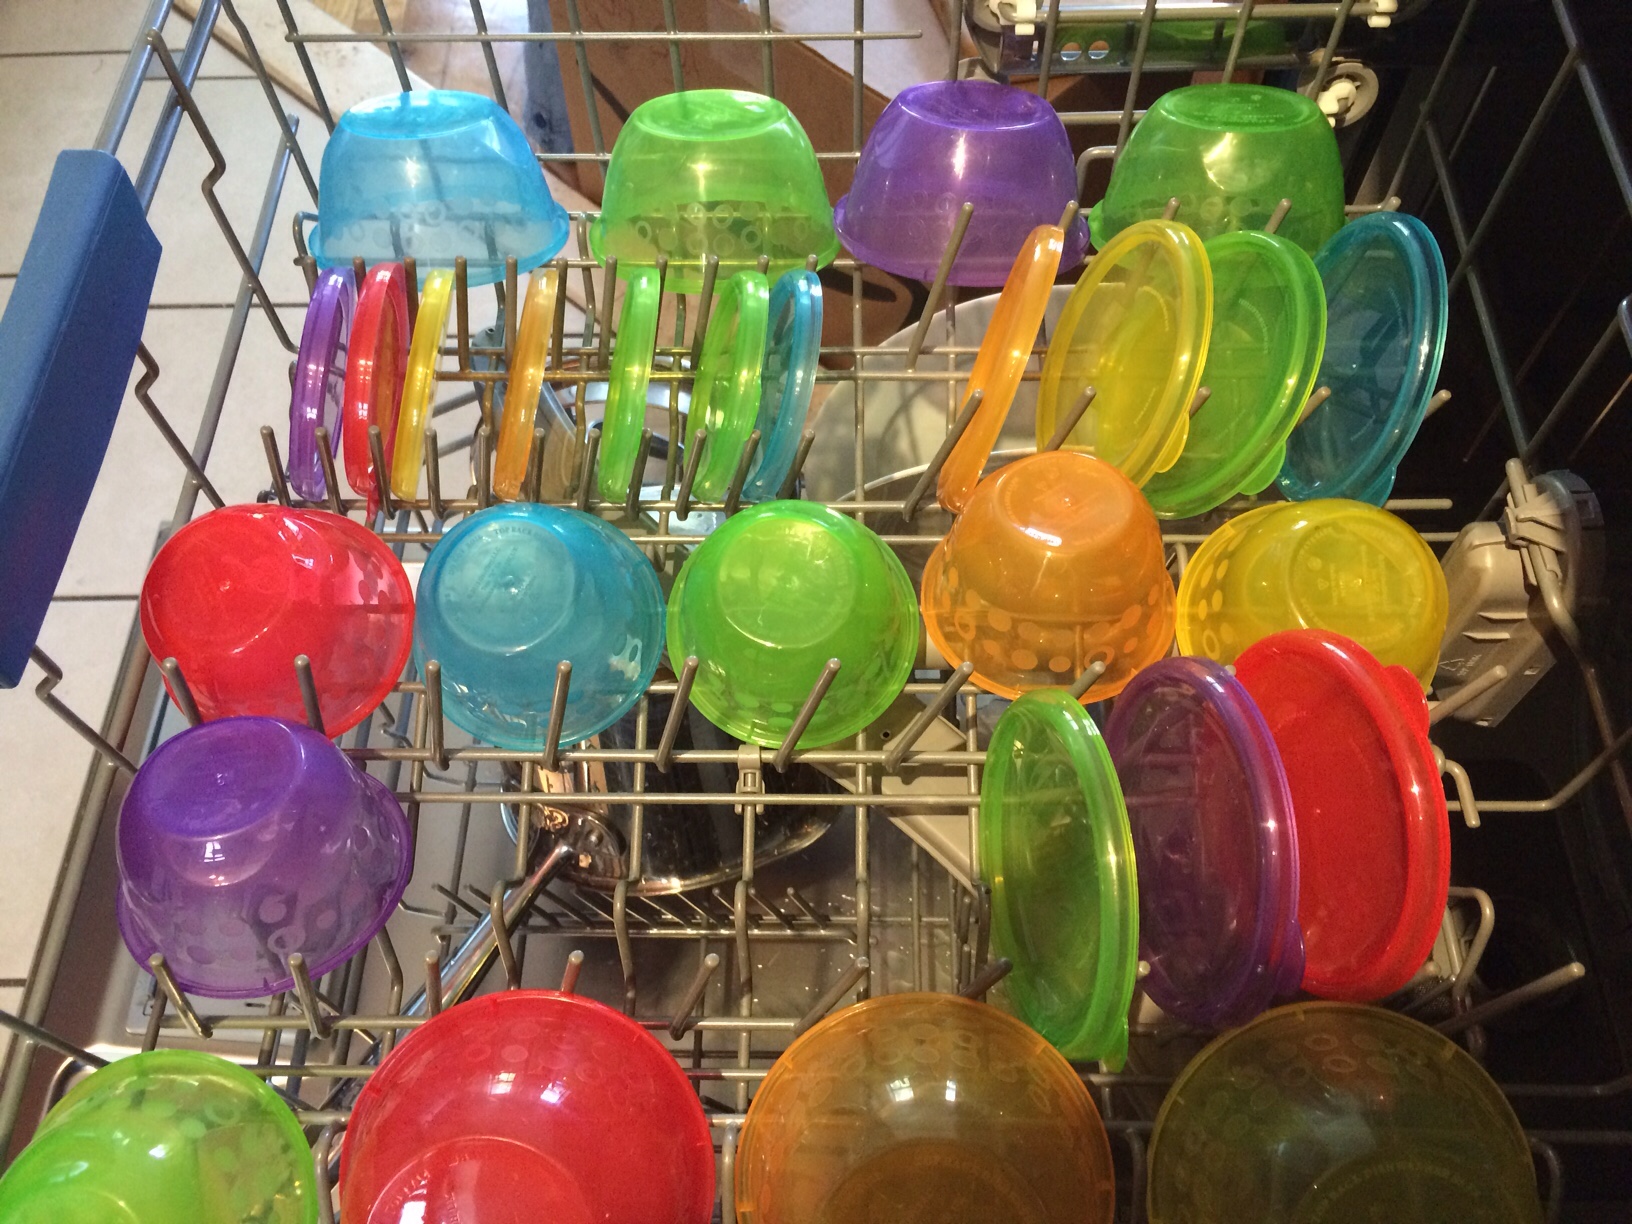 Colored containers in dishwasher